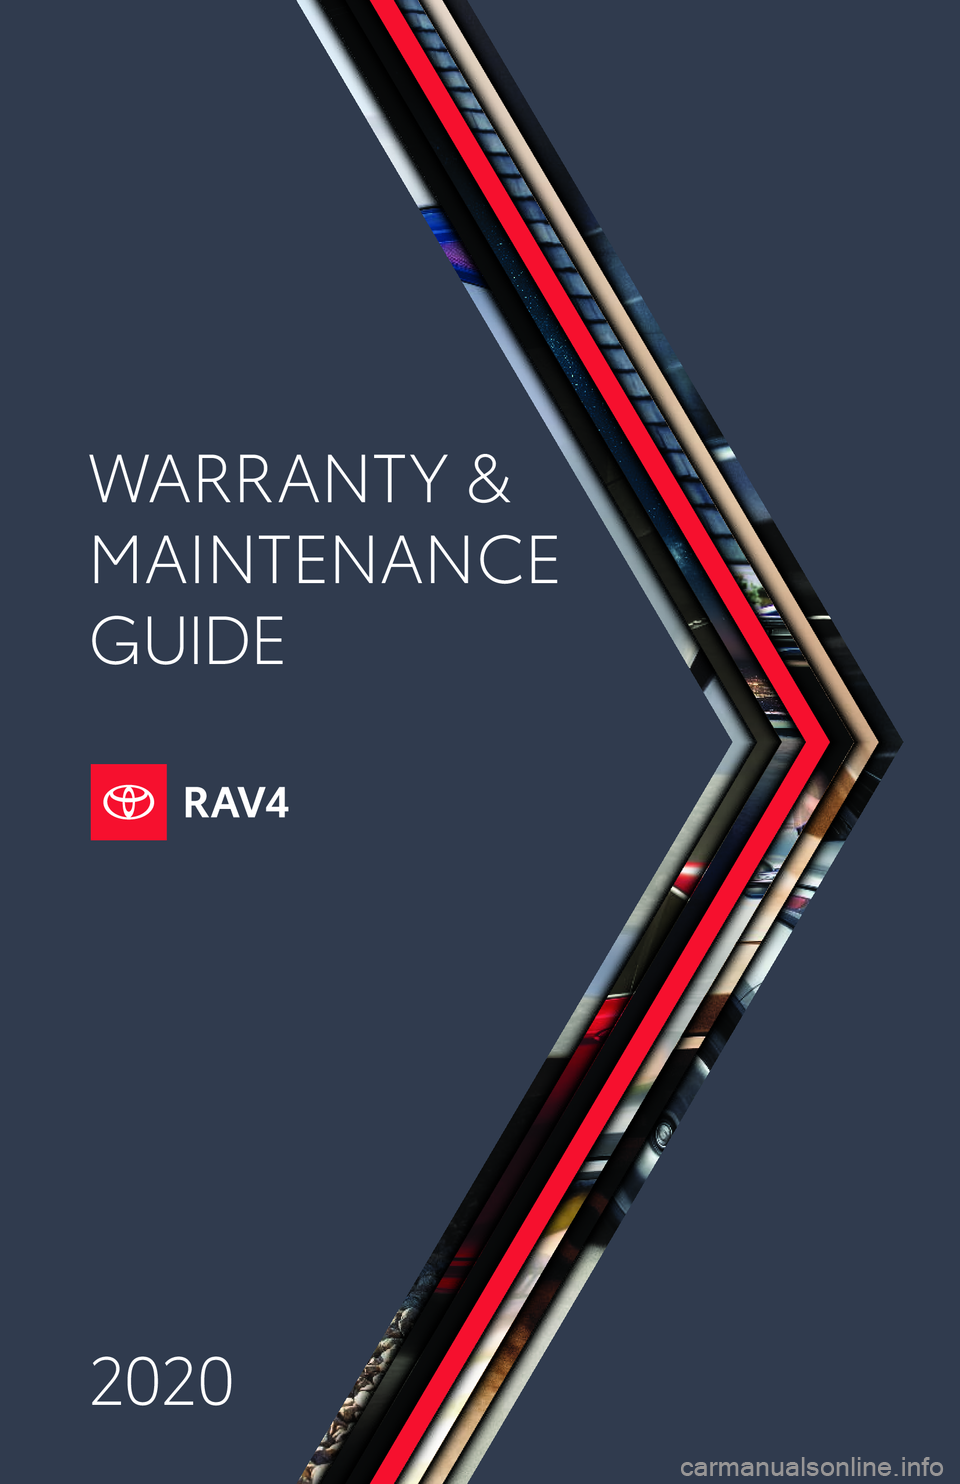 TOYOTA RAV4 2020  Warranties & Maintenance Guides (in English) 2020
WARRANT Y &
MAINTENANCE 
GUIDE
122400_18-TCS-12626 MY20 WMG RAV4 D COVER_R1.indd   18/22/19   5:25 PM        